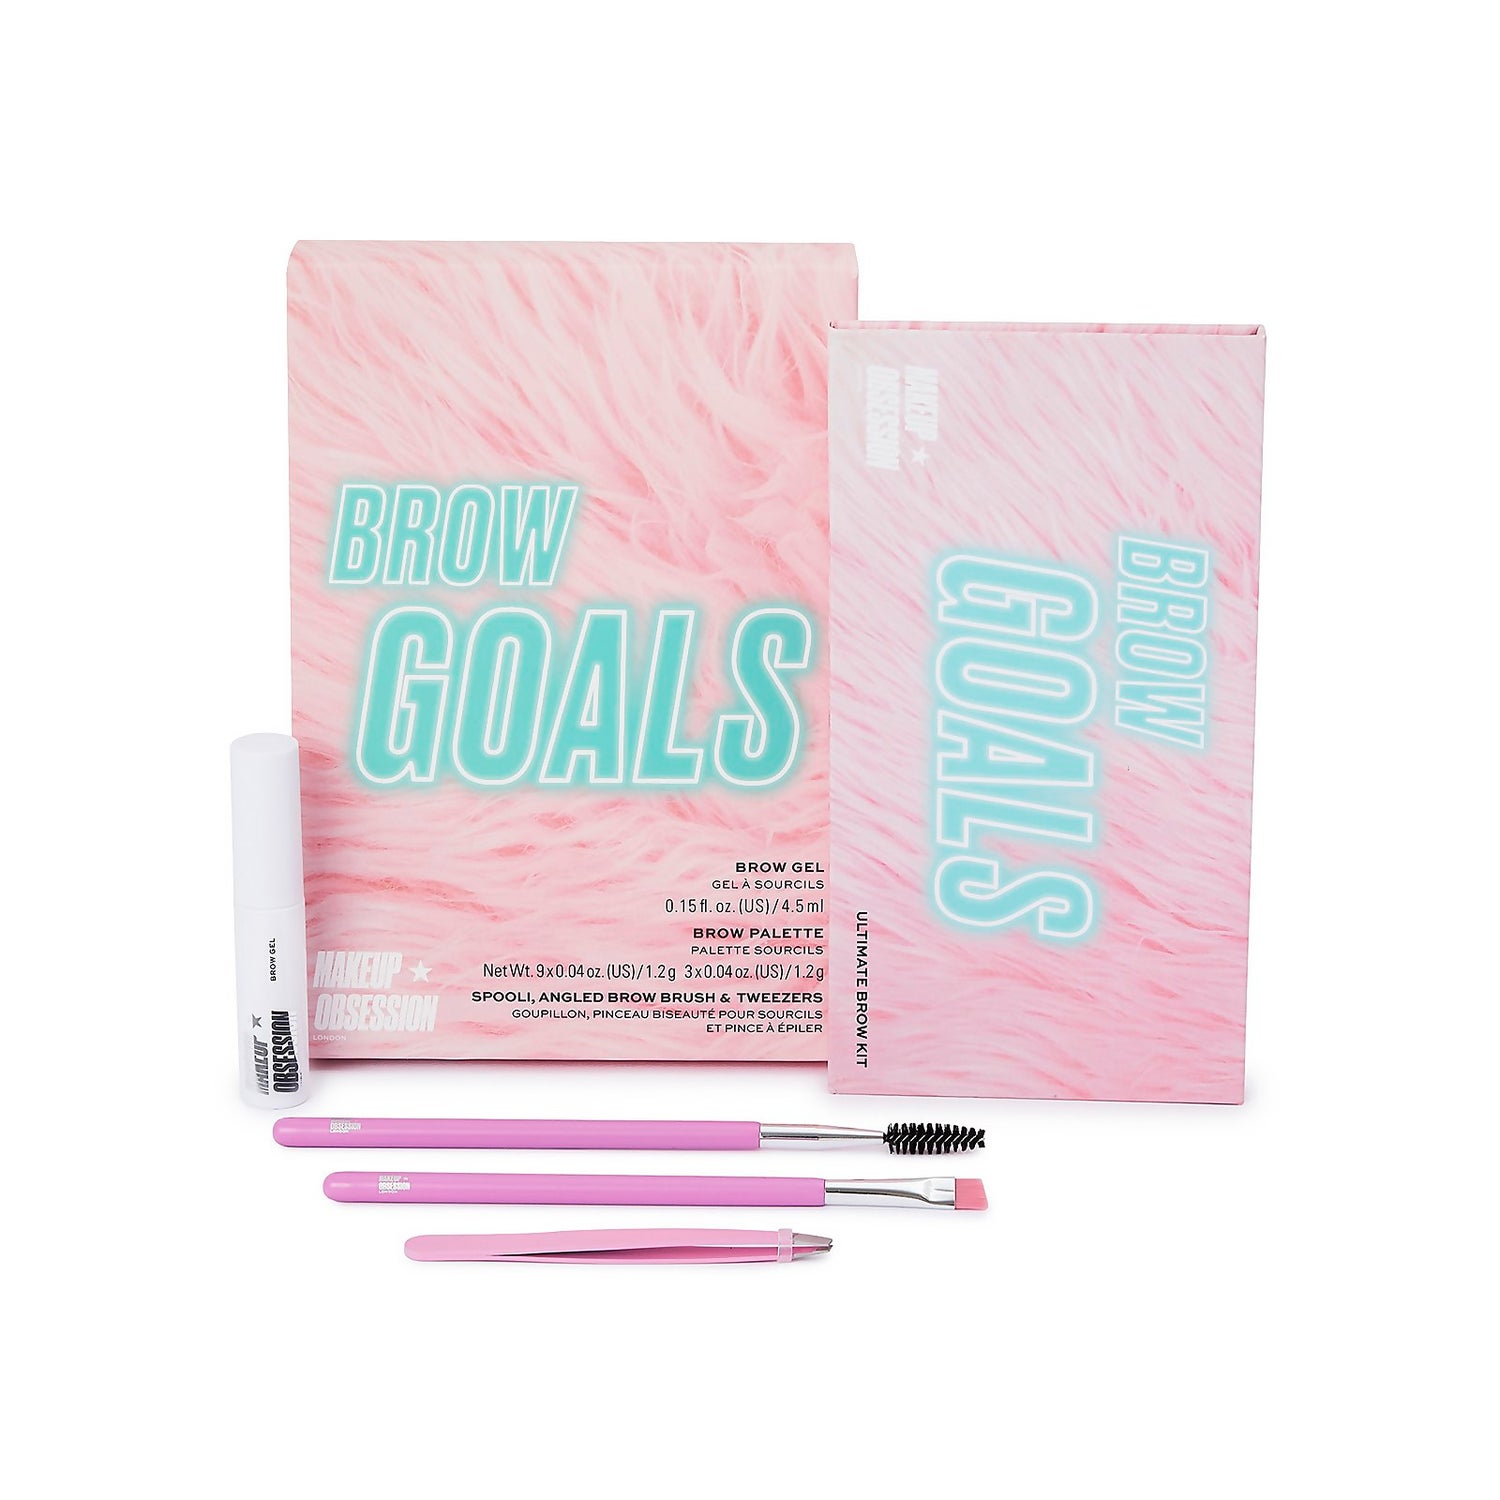 Makeup Obsession Ultimate Brow Goals Kit